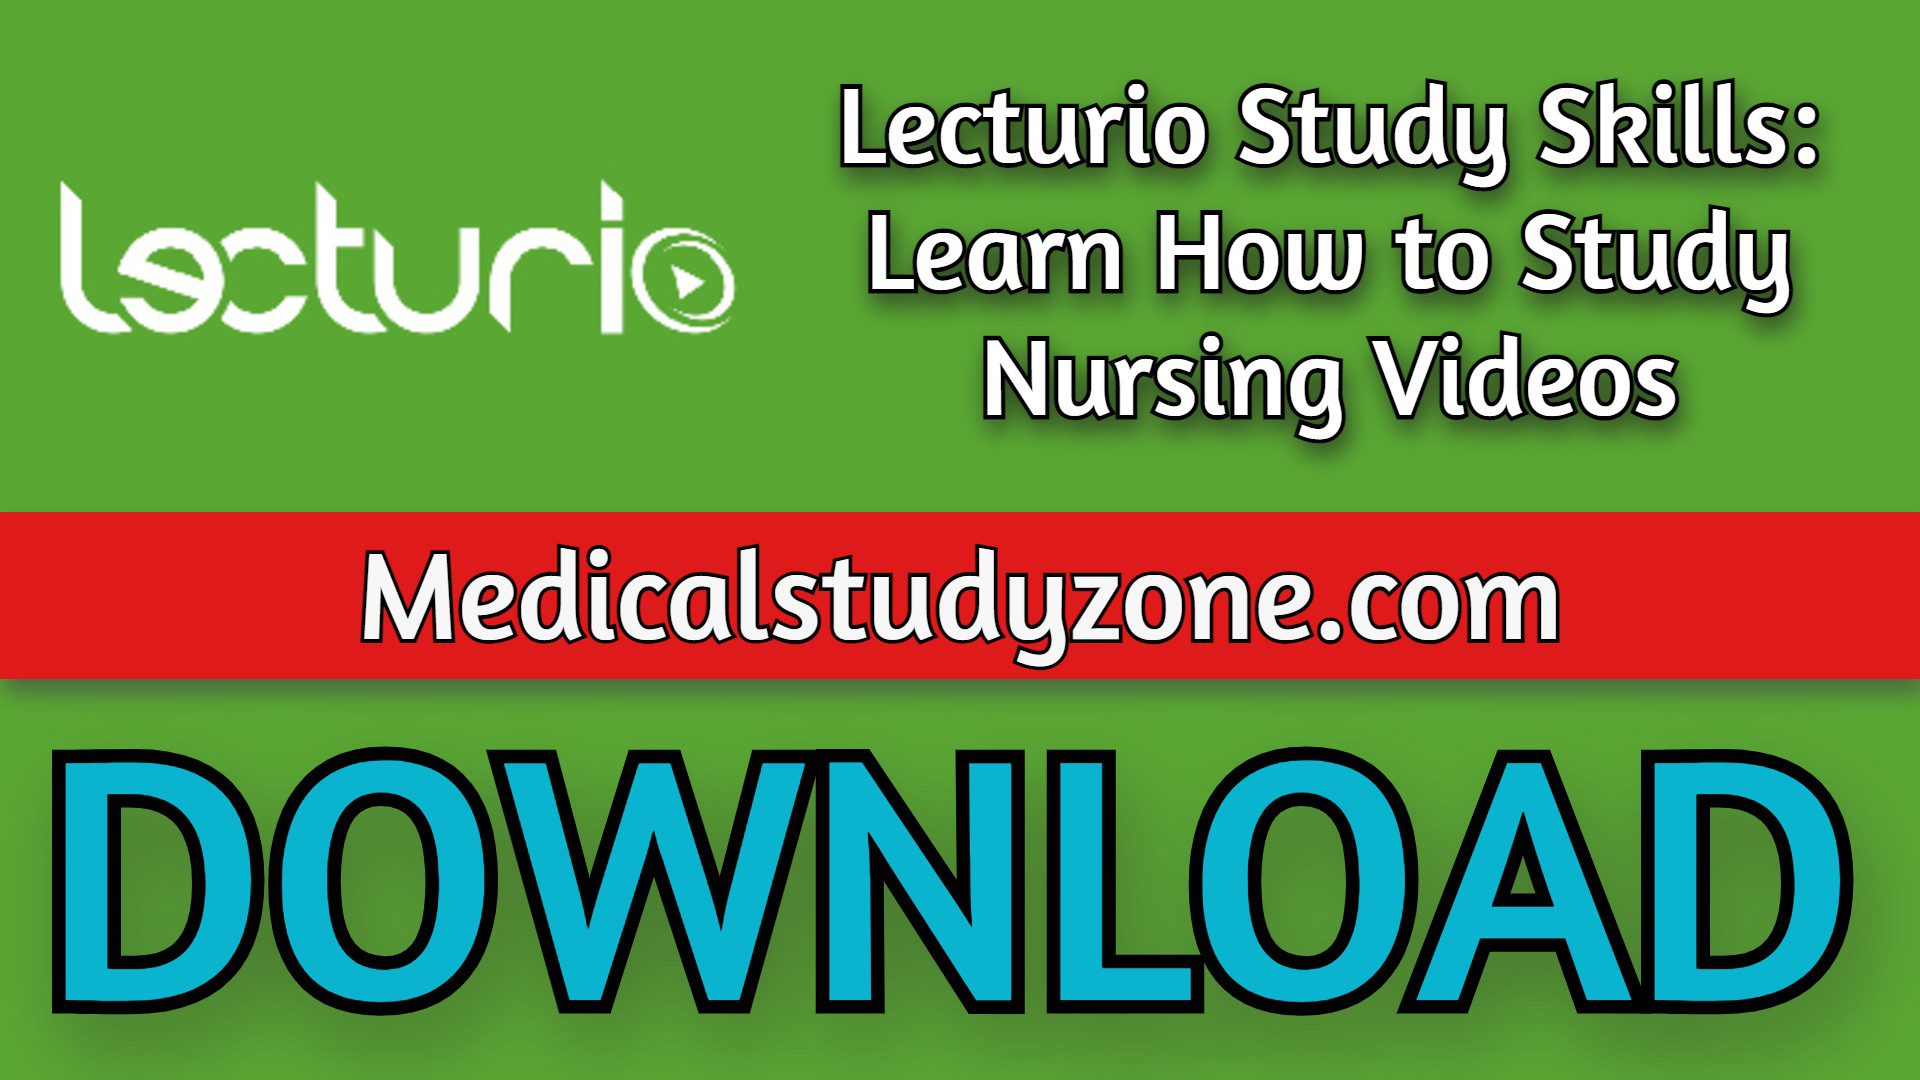 Lecturio Study Skills: Learn How to Study Nursing Videos 2021 Free Download